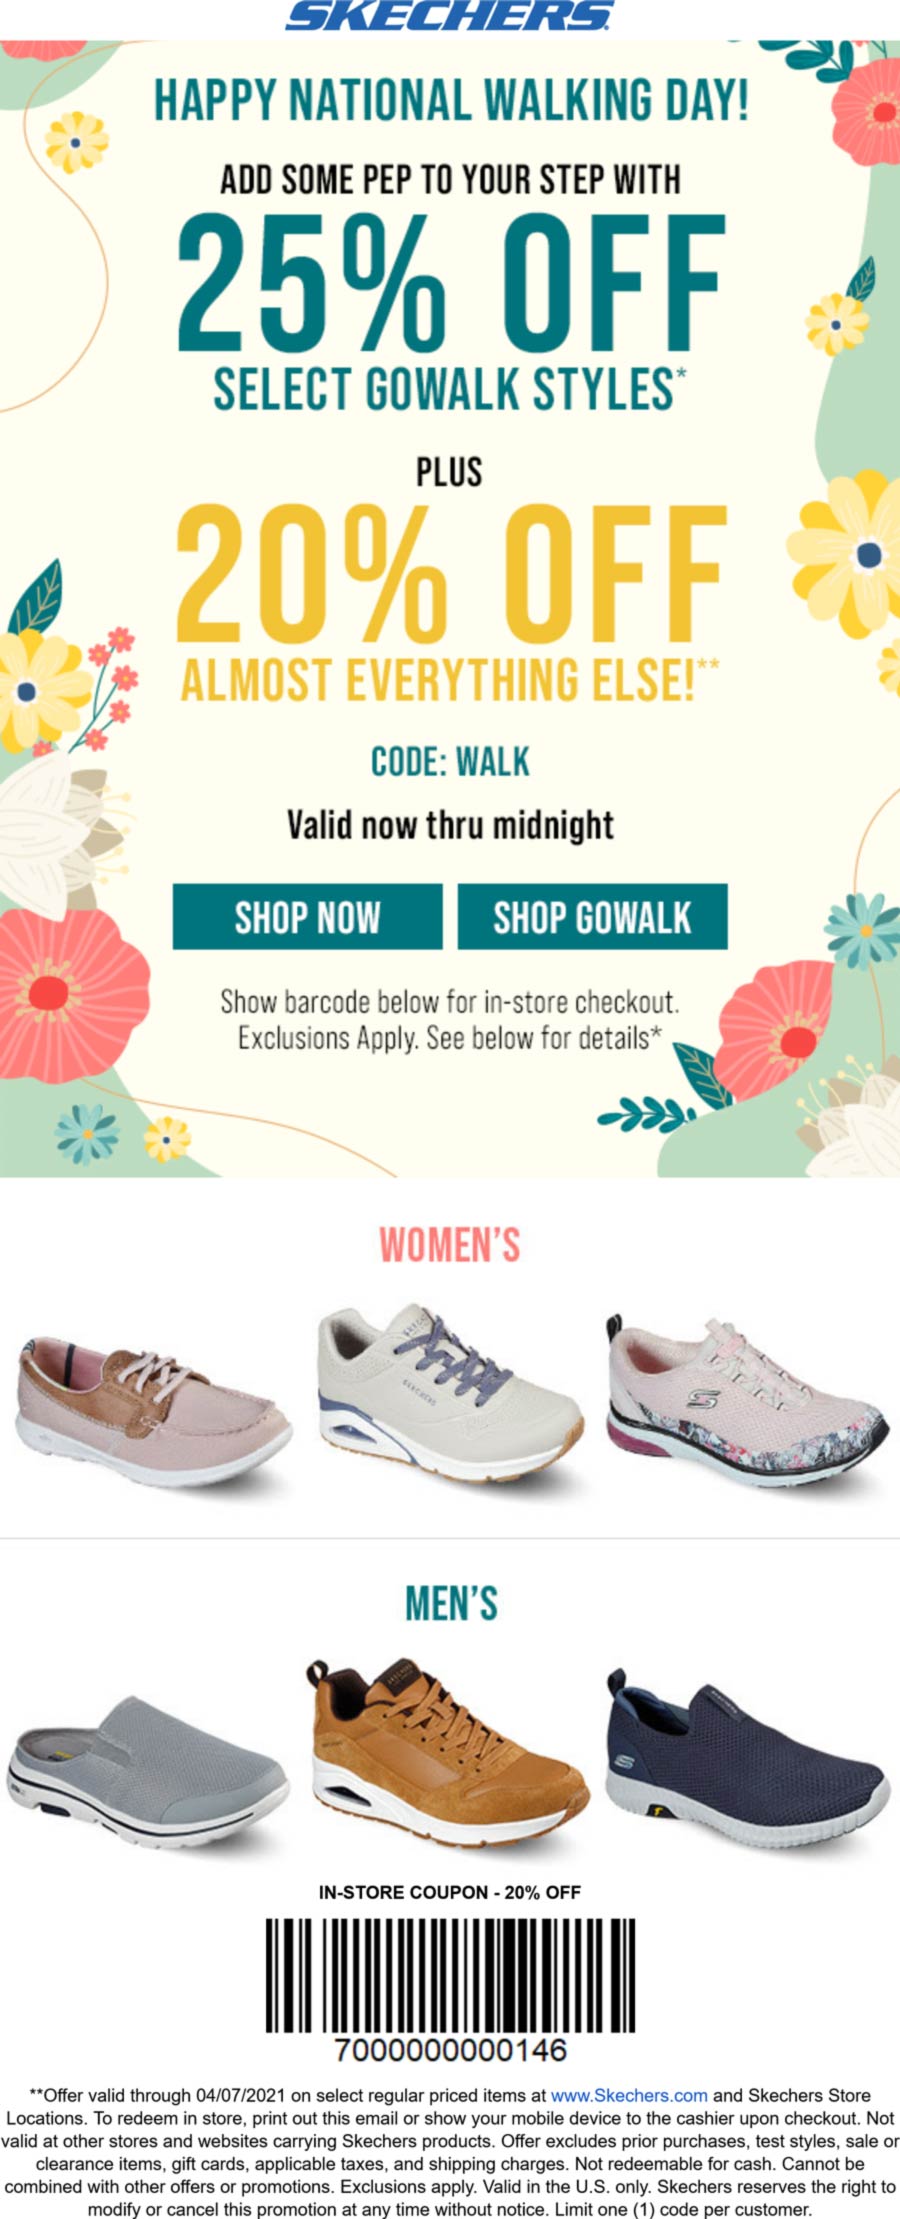 Skechers stores Coupon  20% off everything today at Skechers shoes, or online via promo code WALK #skechers 